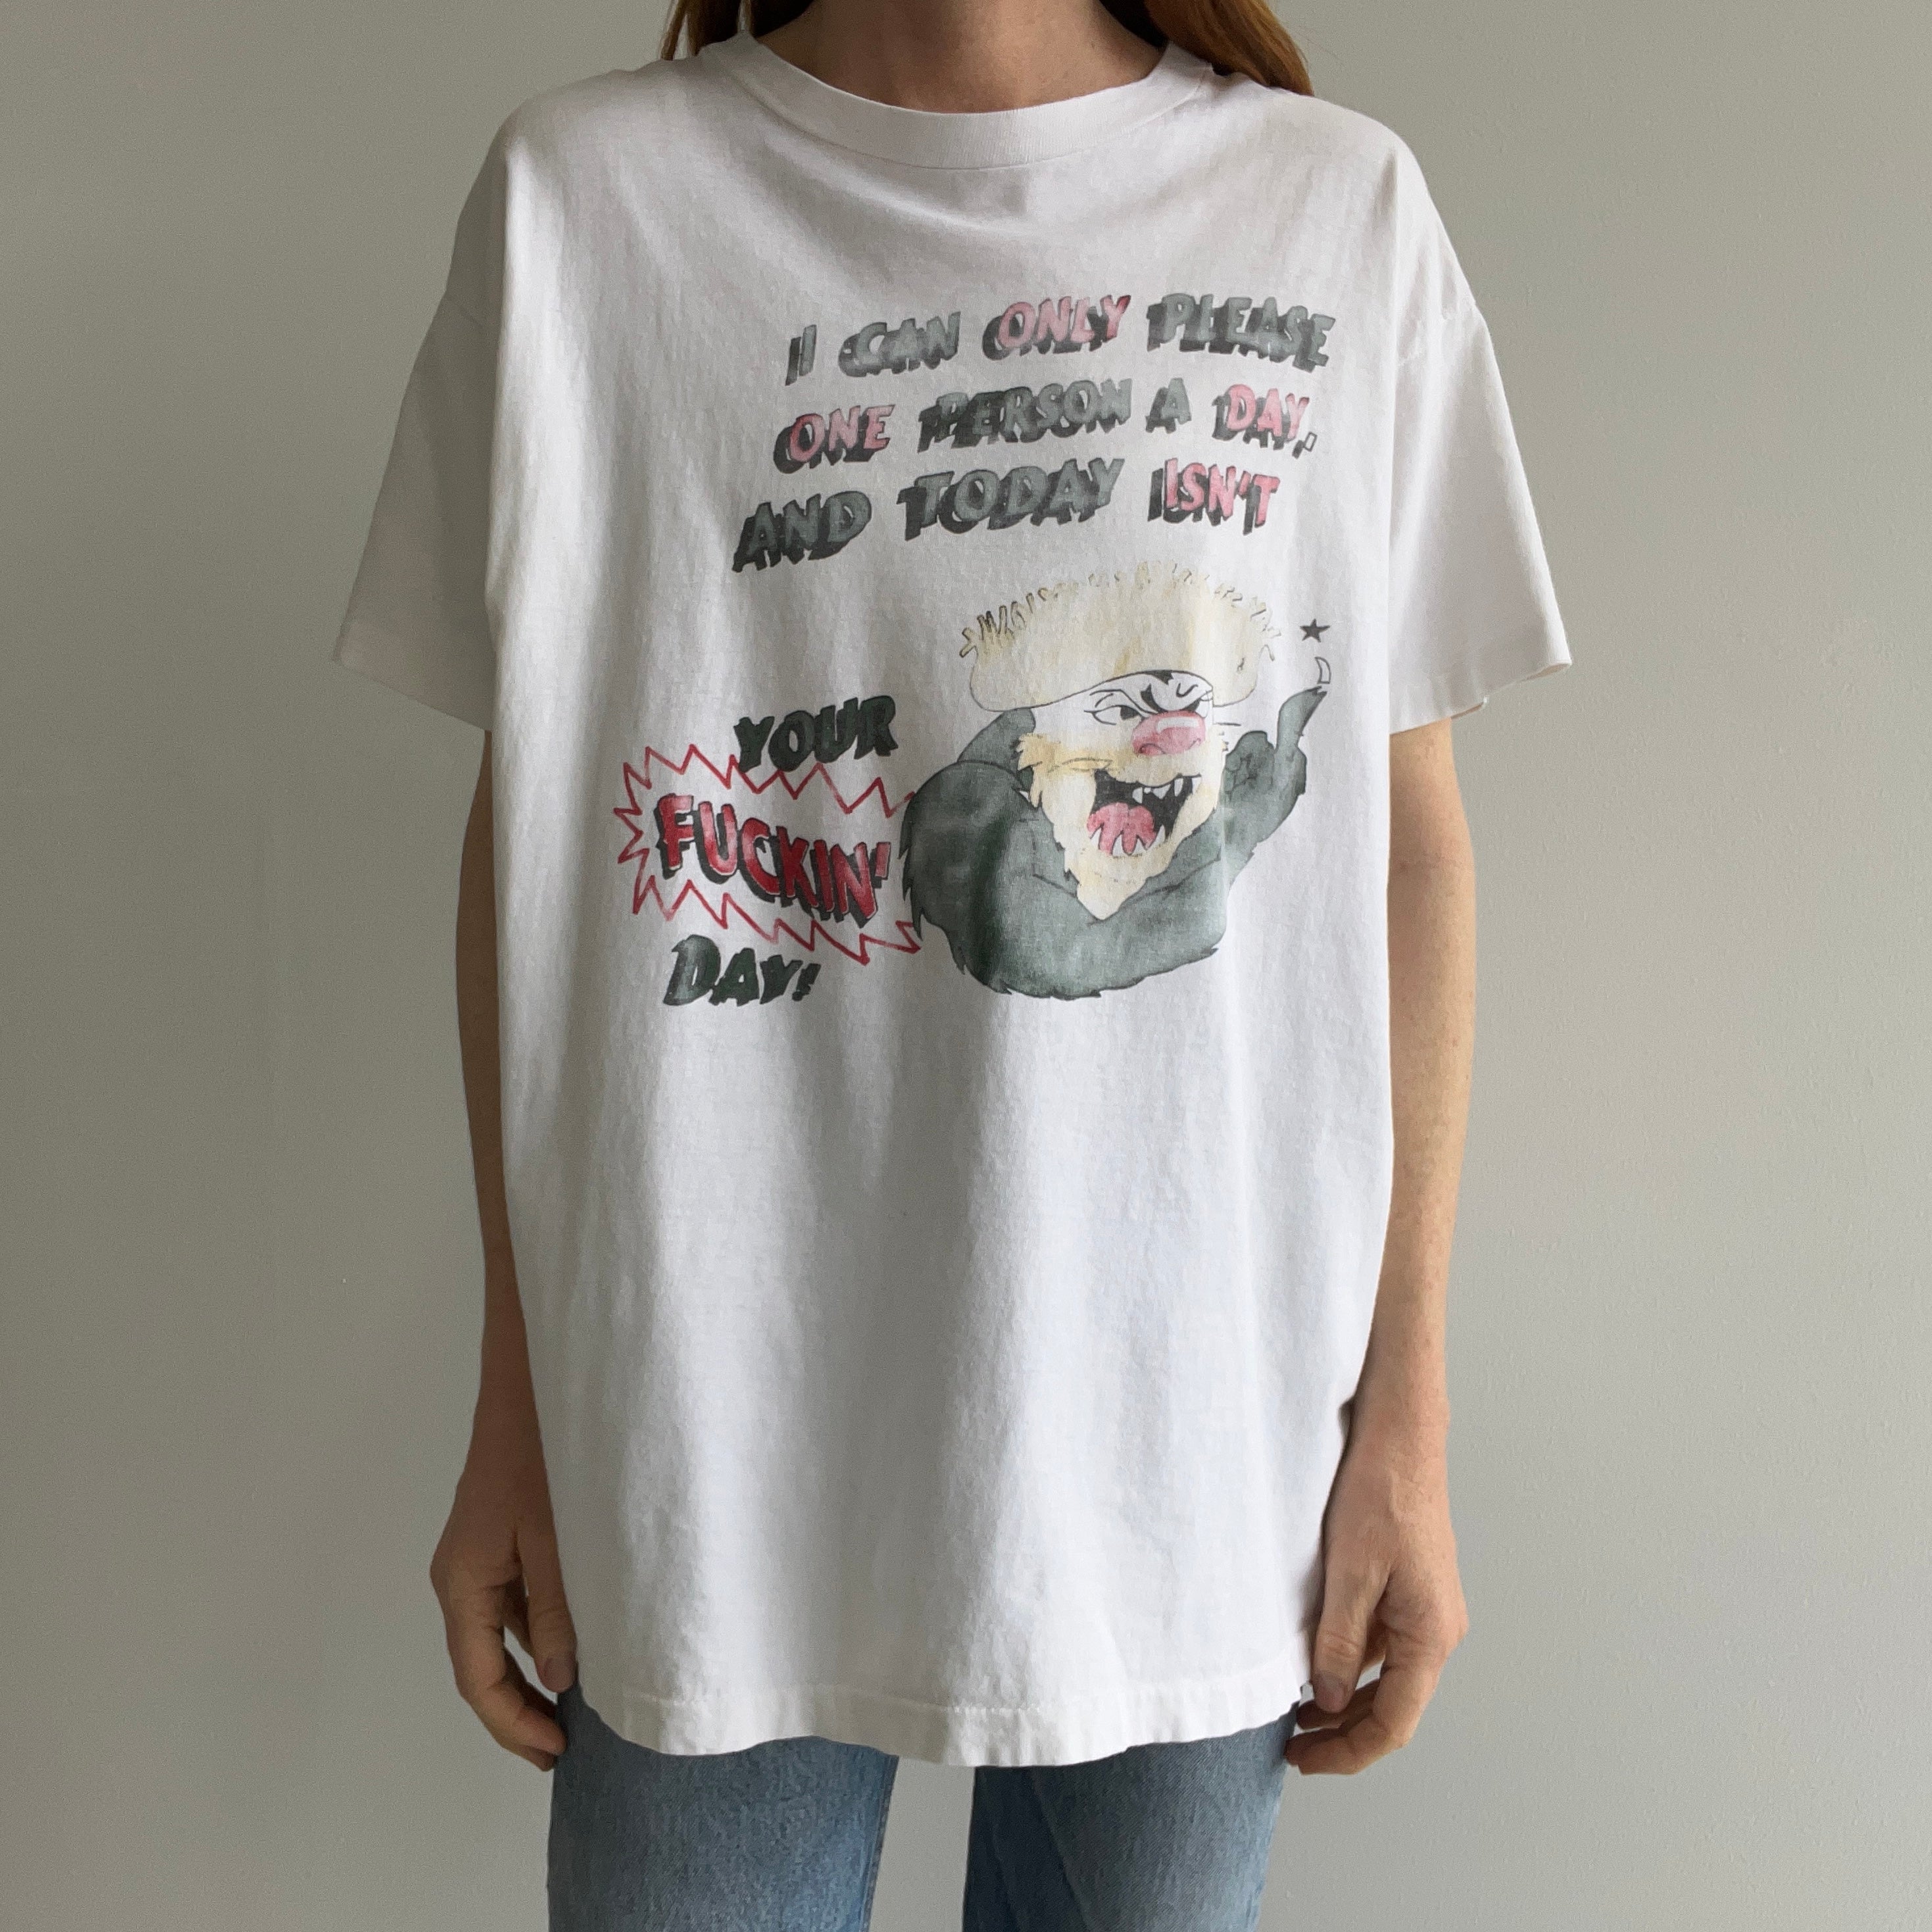 1980s Inappropriate and Rude T-Shirt